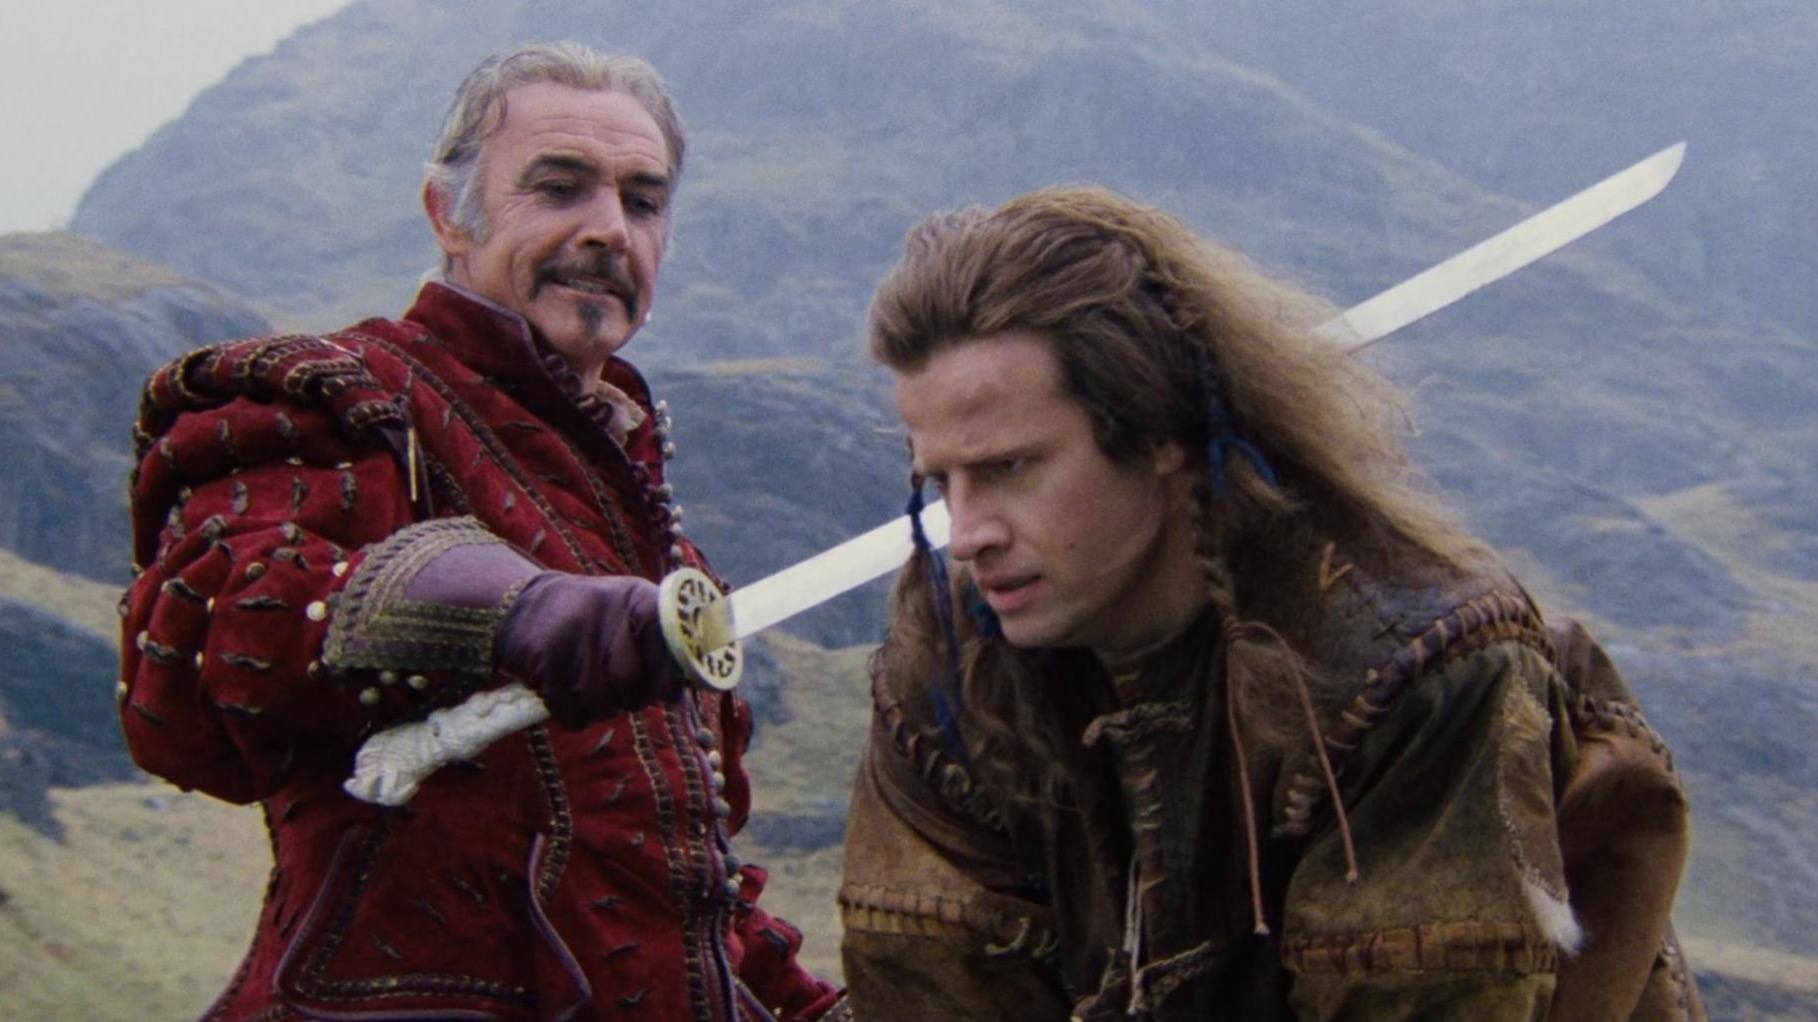 Chad Stahelski Will Direct Highlander Starring Henry Cavill As Next Movie